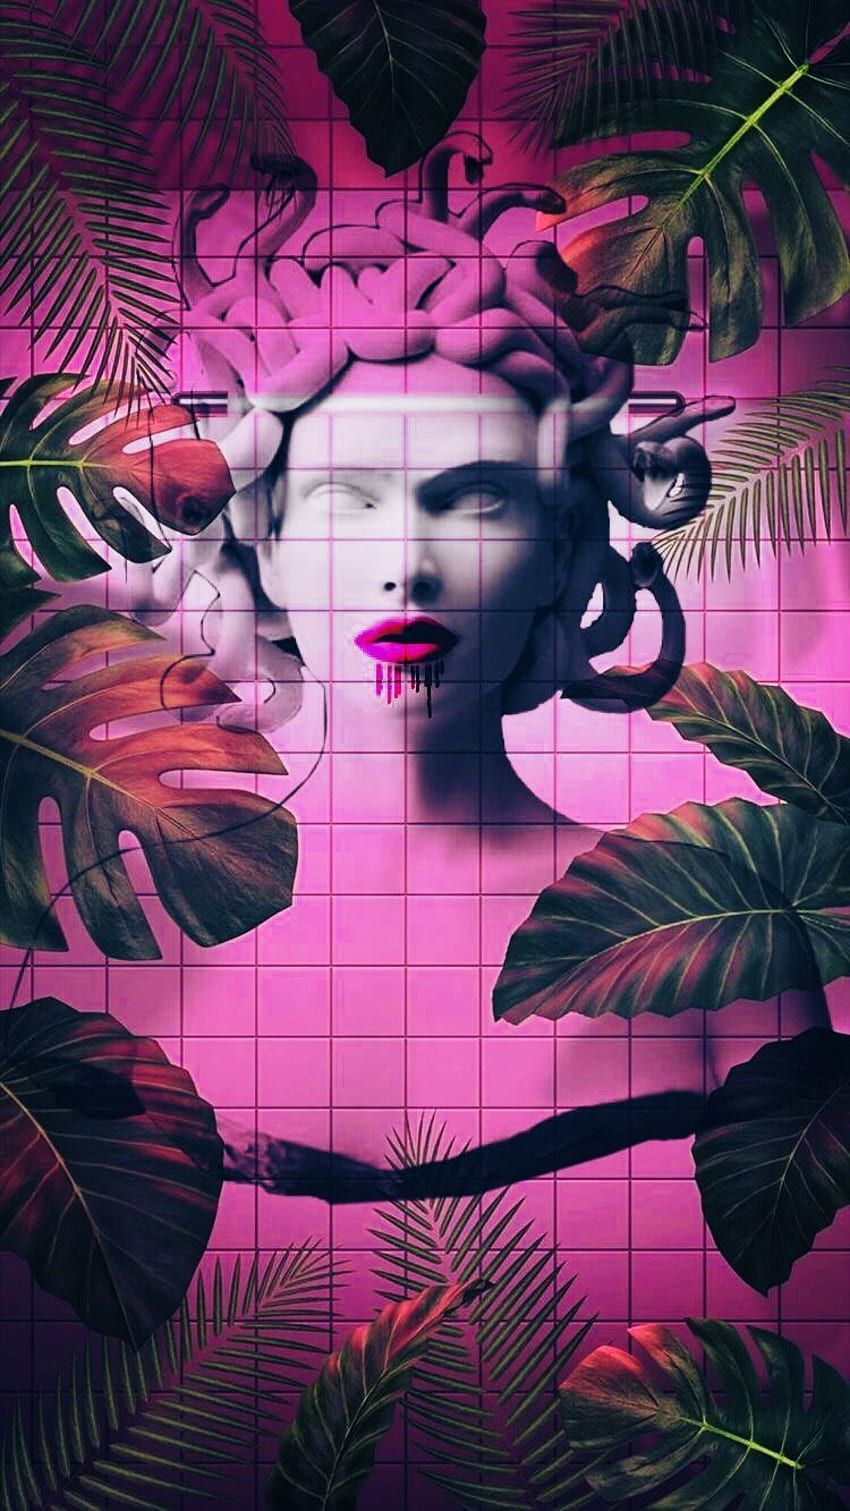 Aesthetic background of a woman's face surrounded by pink and green leaves - Medusa